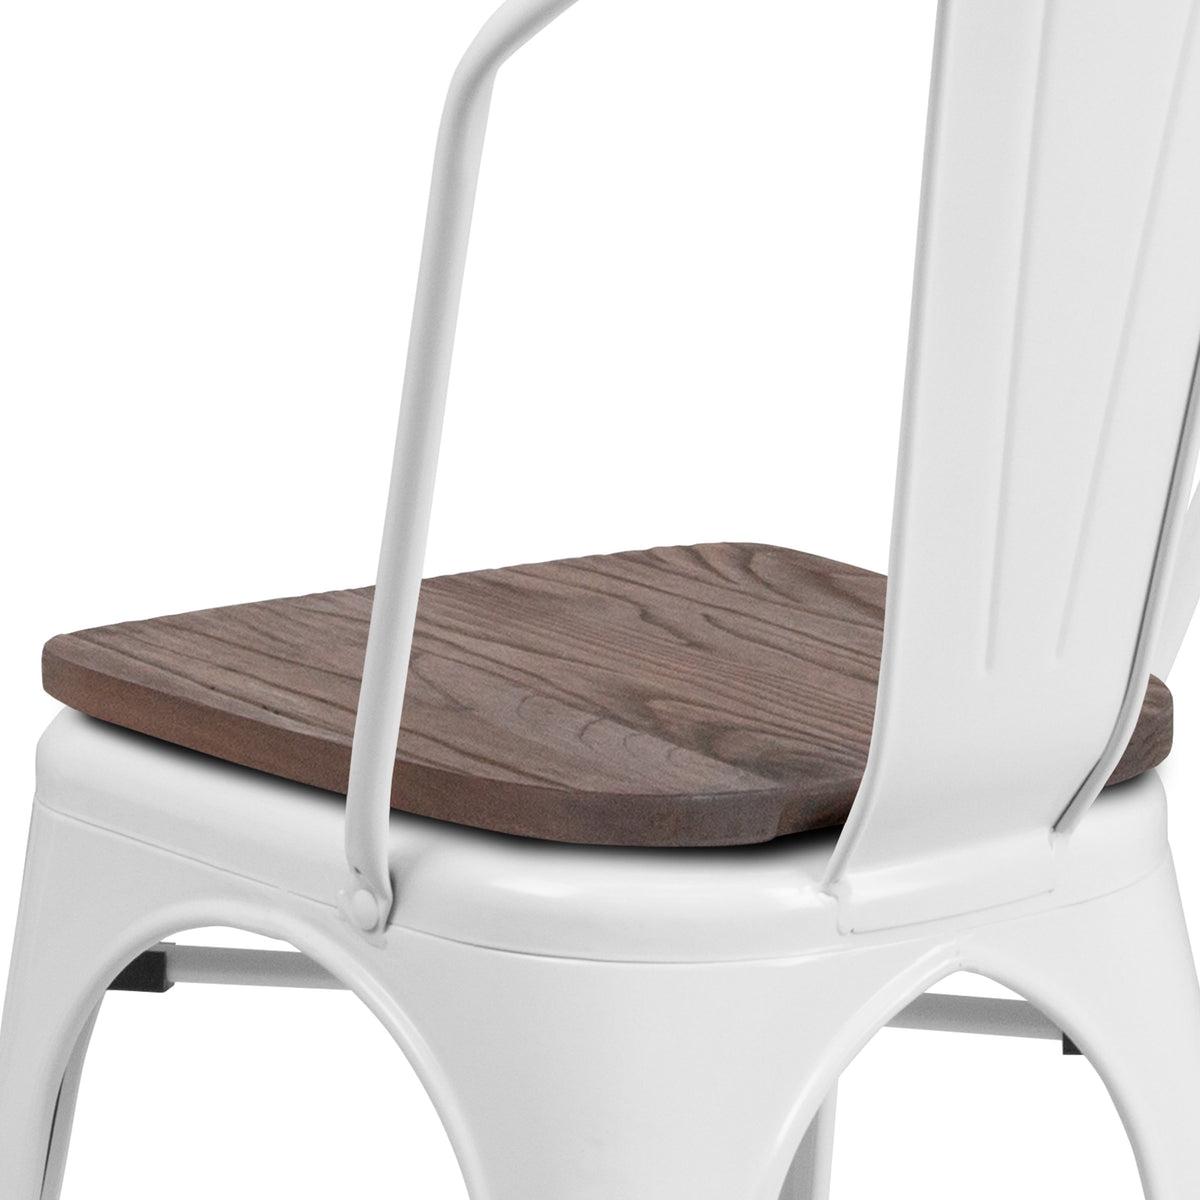 White |#| White Metal Stackable Chair with Wood Seat - Restaurant Chair - Bistro Chair